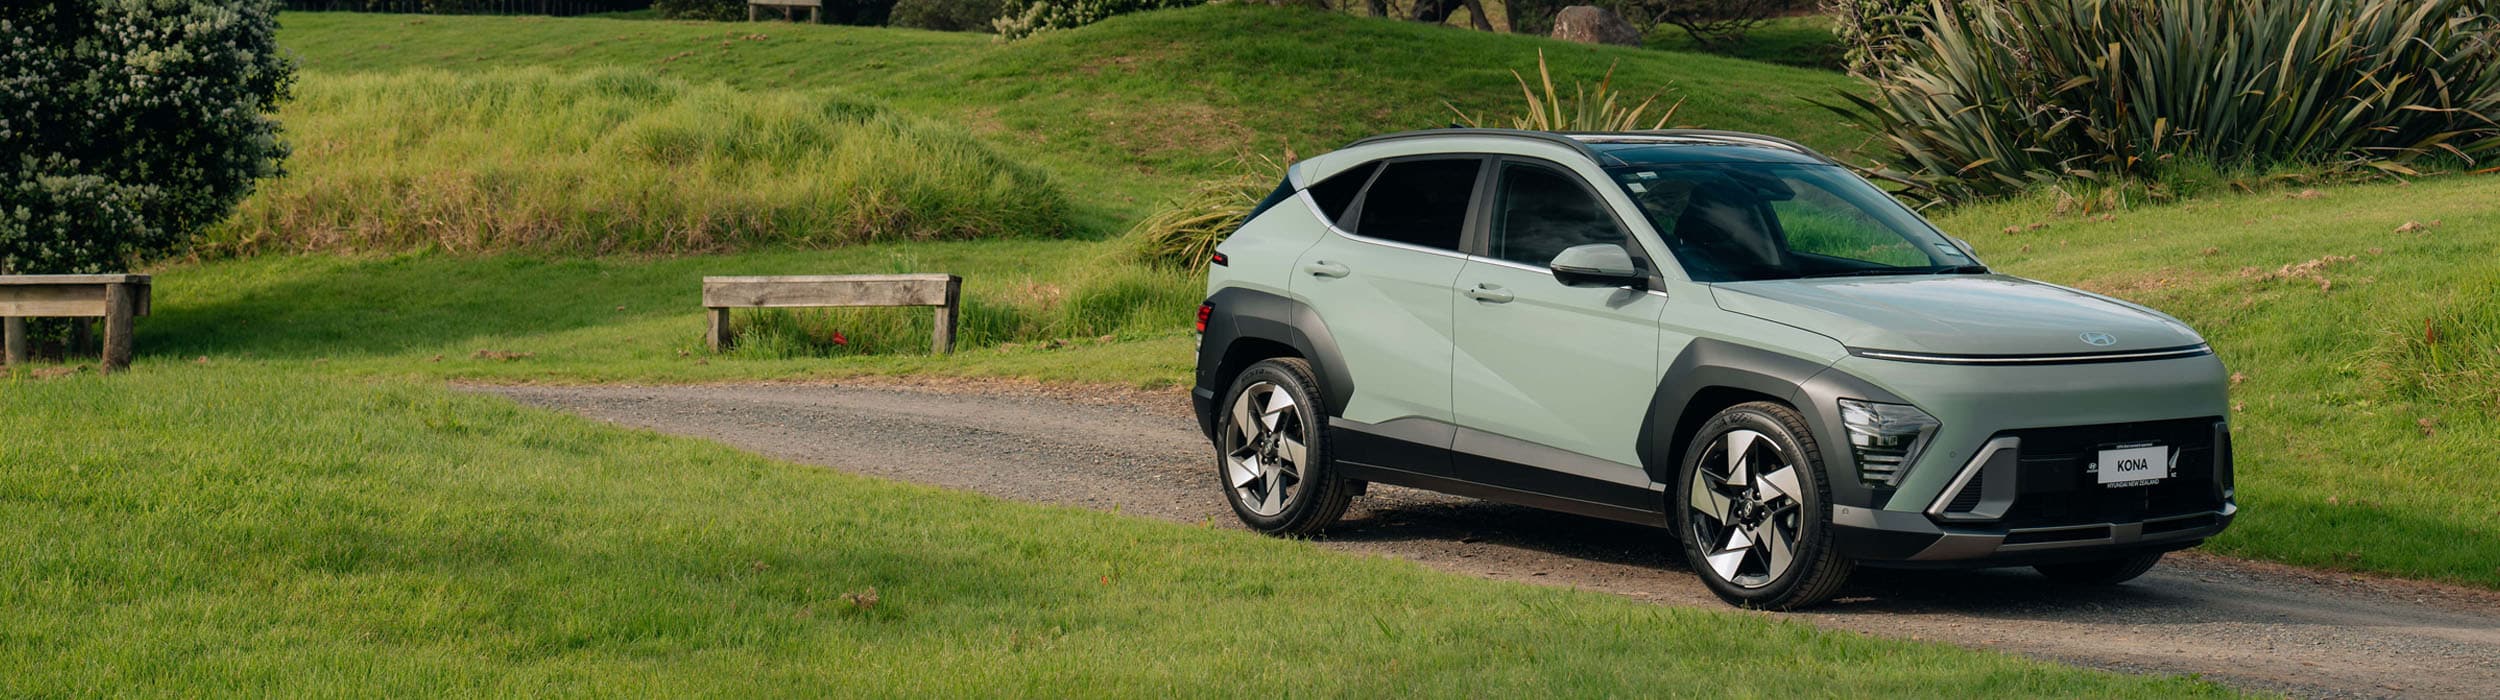 All-new KONA  Pricing and specification